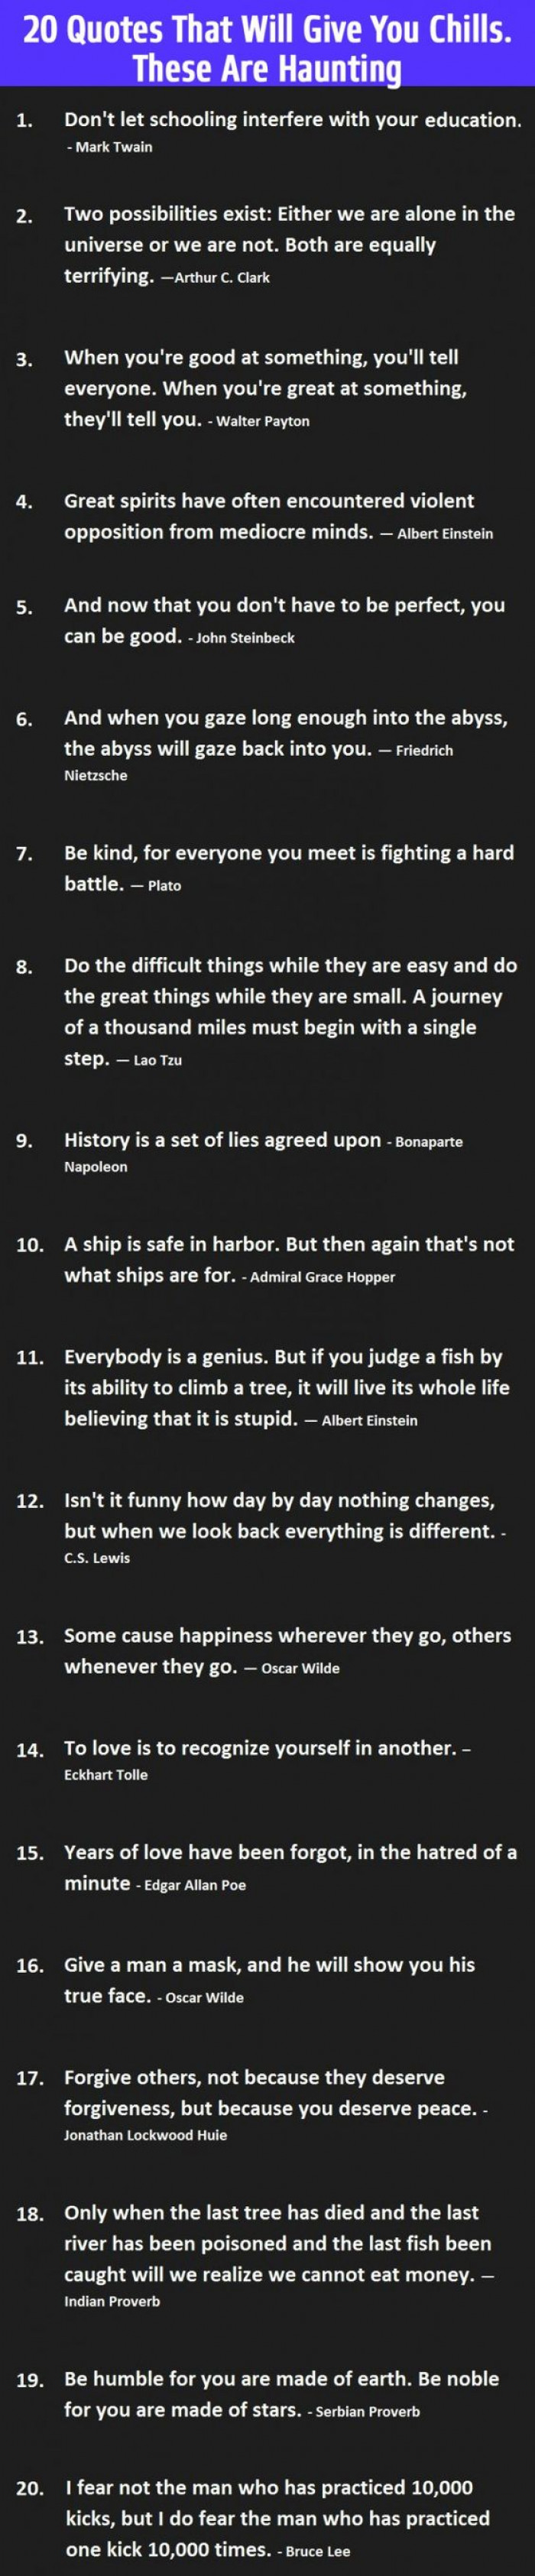 20 Famous Quotes